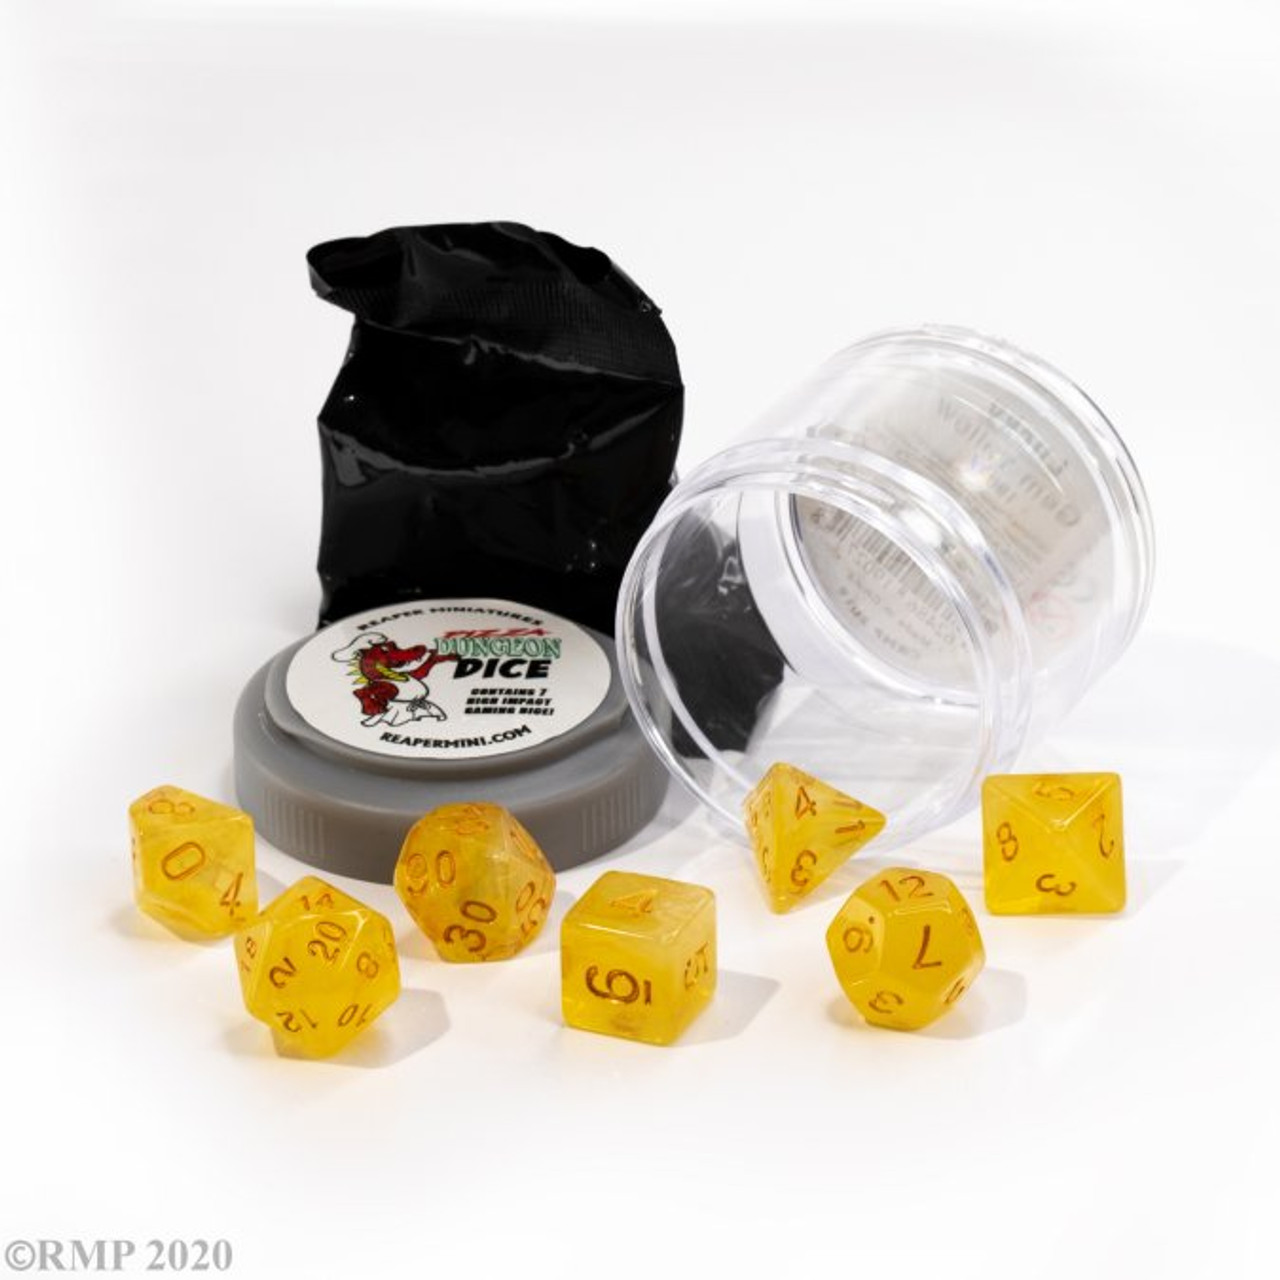 19027 - Pizza Dungeon Dice: Lucky Dice - Gem Yellow